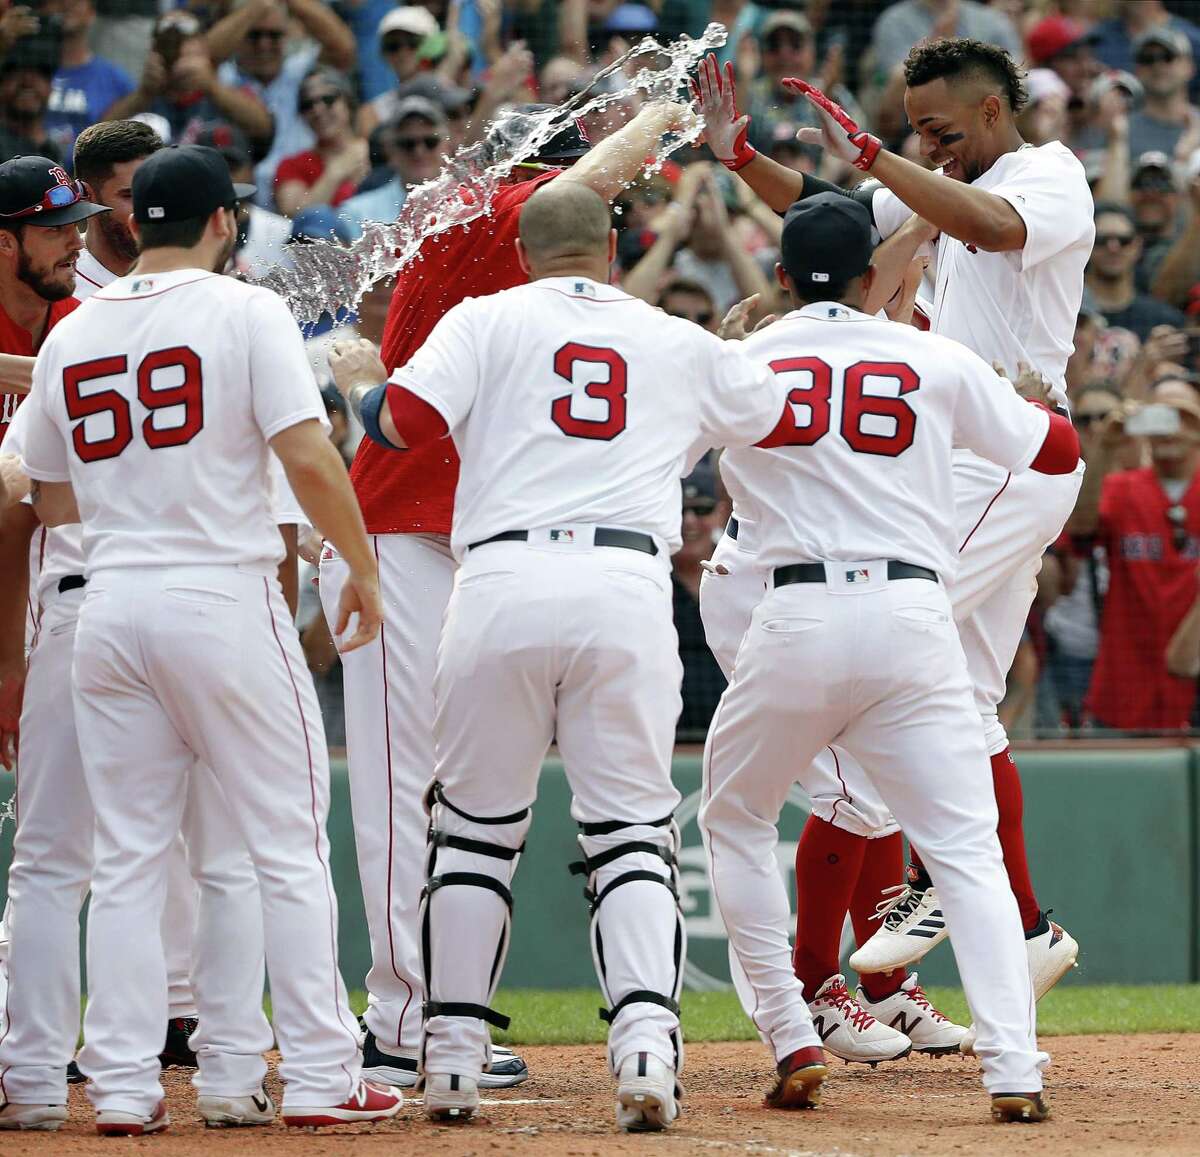 Xander Bogaerts, right, is greeted by teammates at home plate after hitting a grand slam in the 10th inning against the Blue Jays on Saturday.